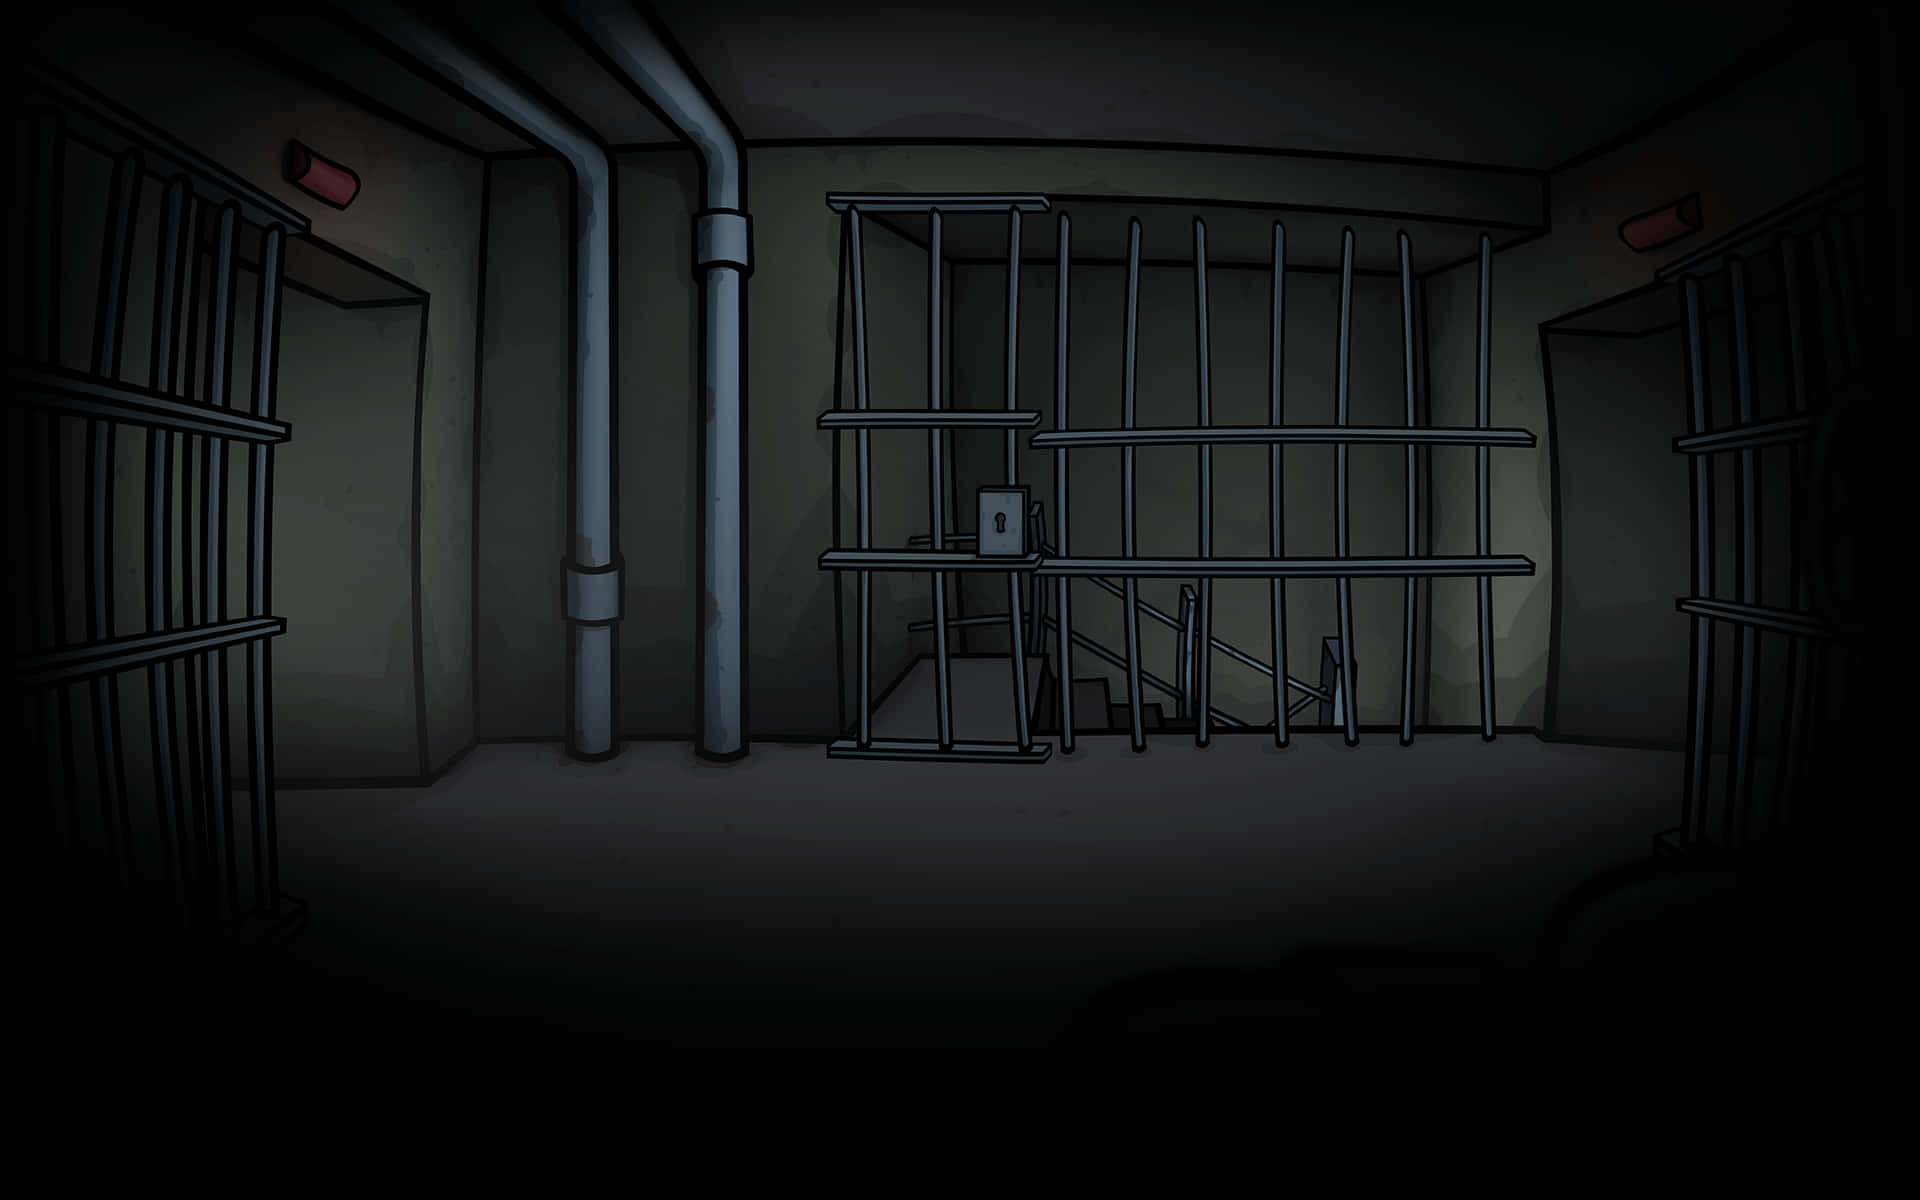 A Dark Room With Bars And A Prison Cell